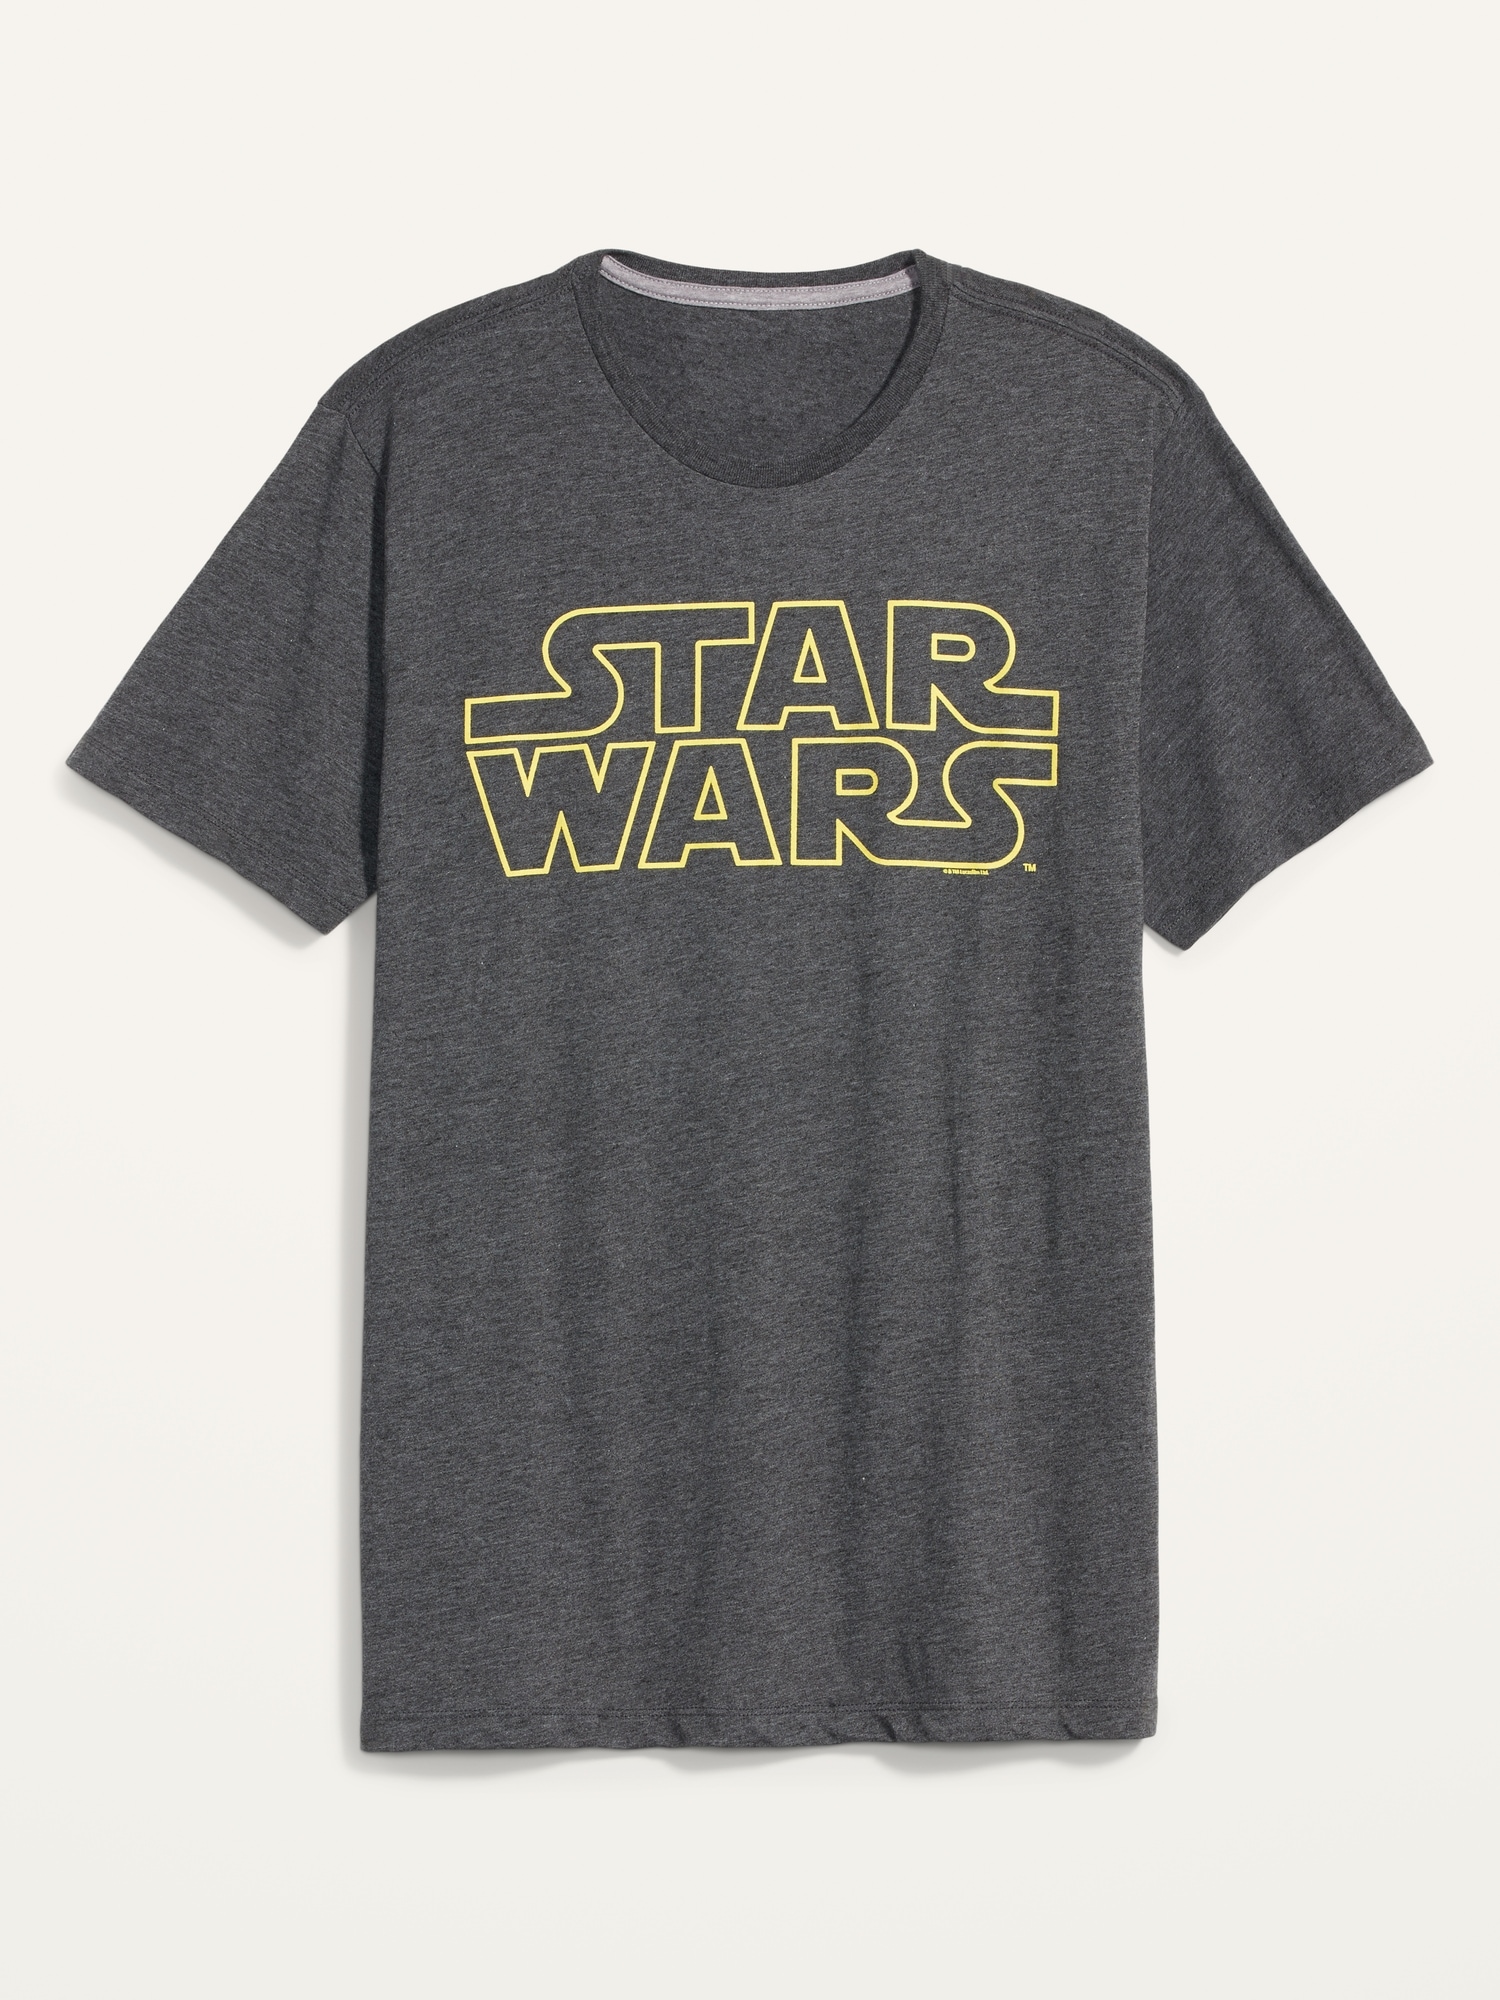 Star Wars Gender-Neutral Graphic T-Shirt for Adults Hot Deal